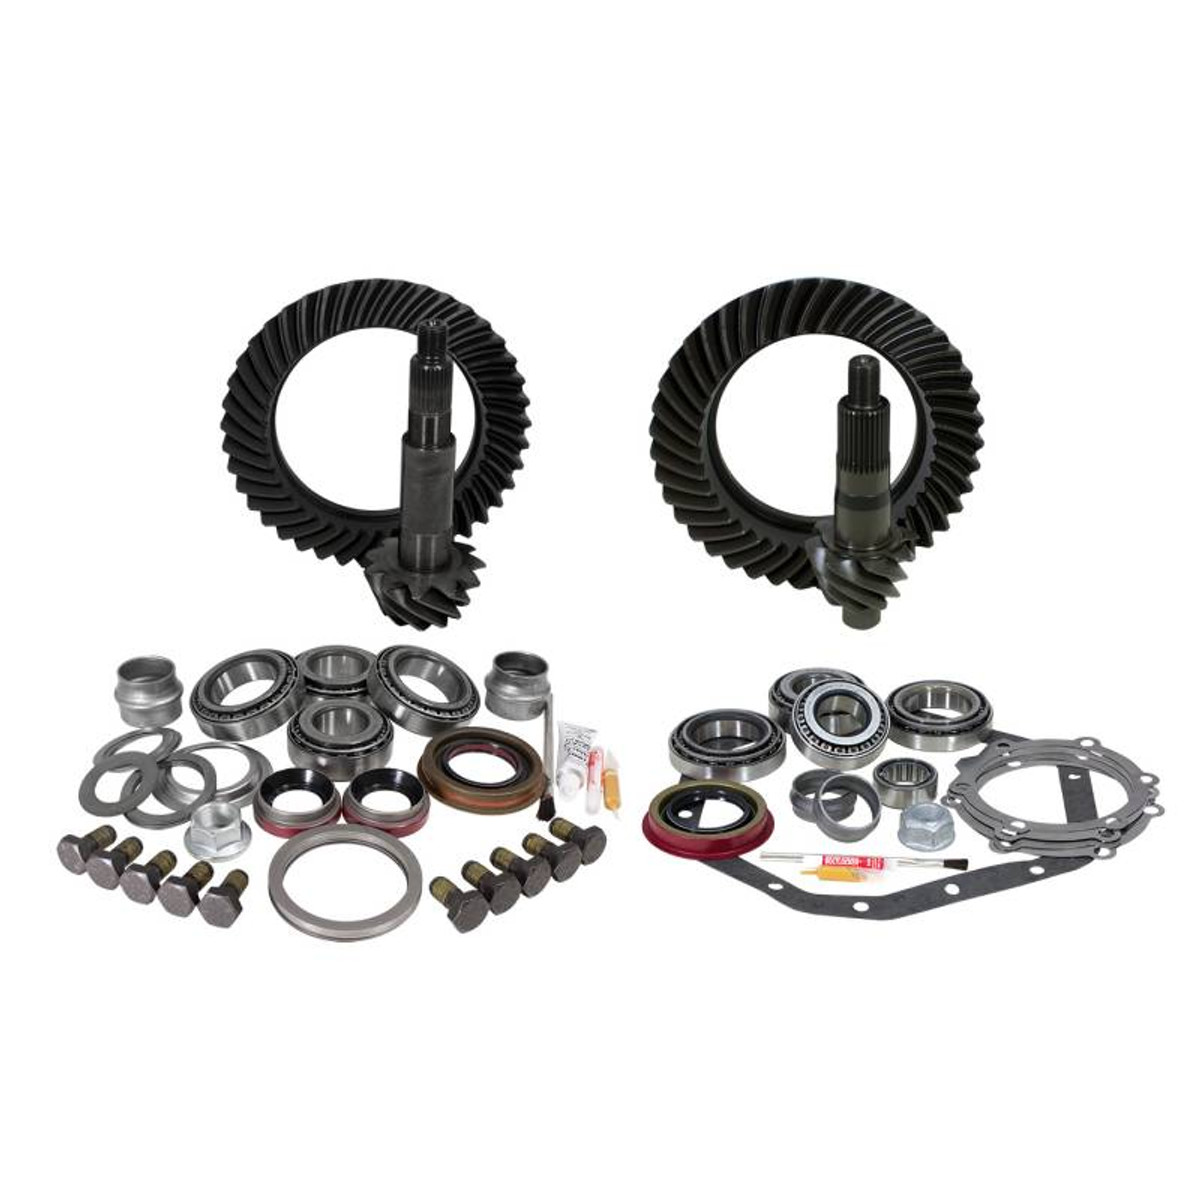 Yukon Gear And Install Kit Package For Standard Rotation Dana 60 And 89-98 GM 14T 4.88 YGK028